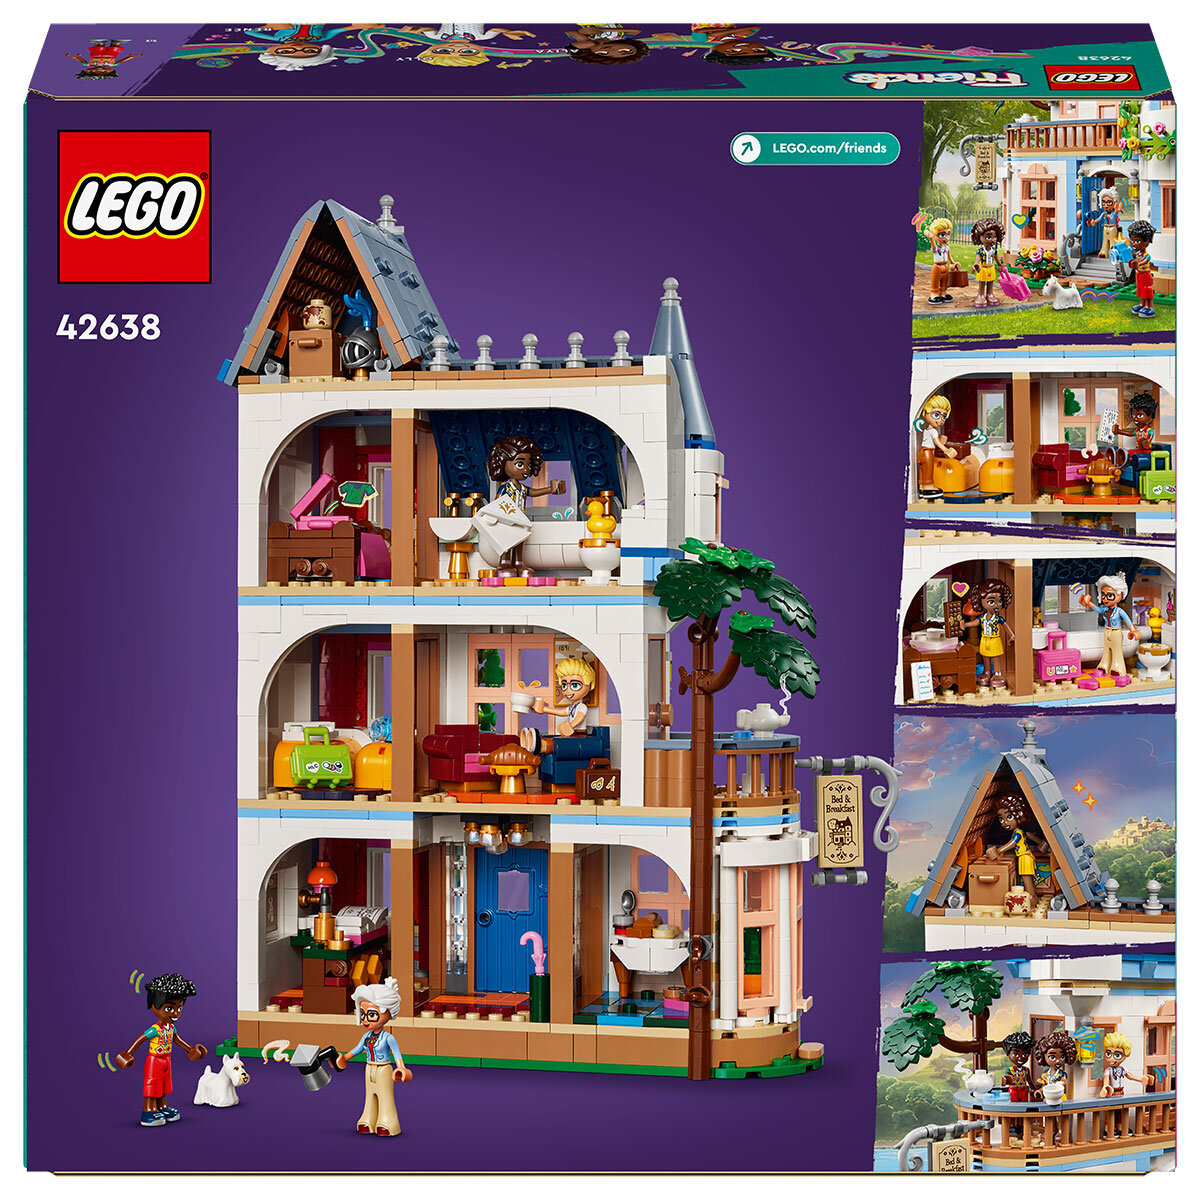 LEGO Friends Castle Bed and Breakfast Box Image